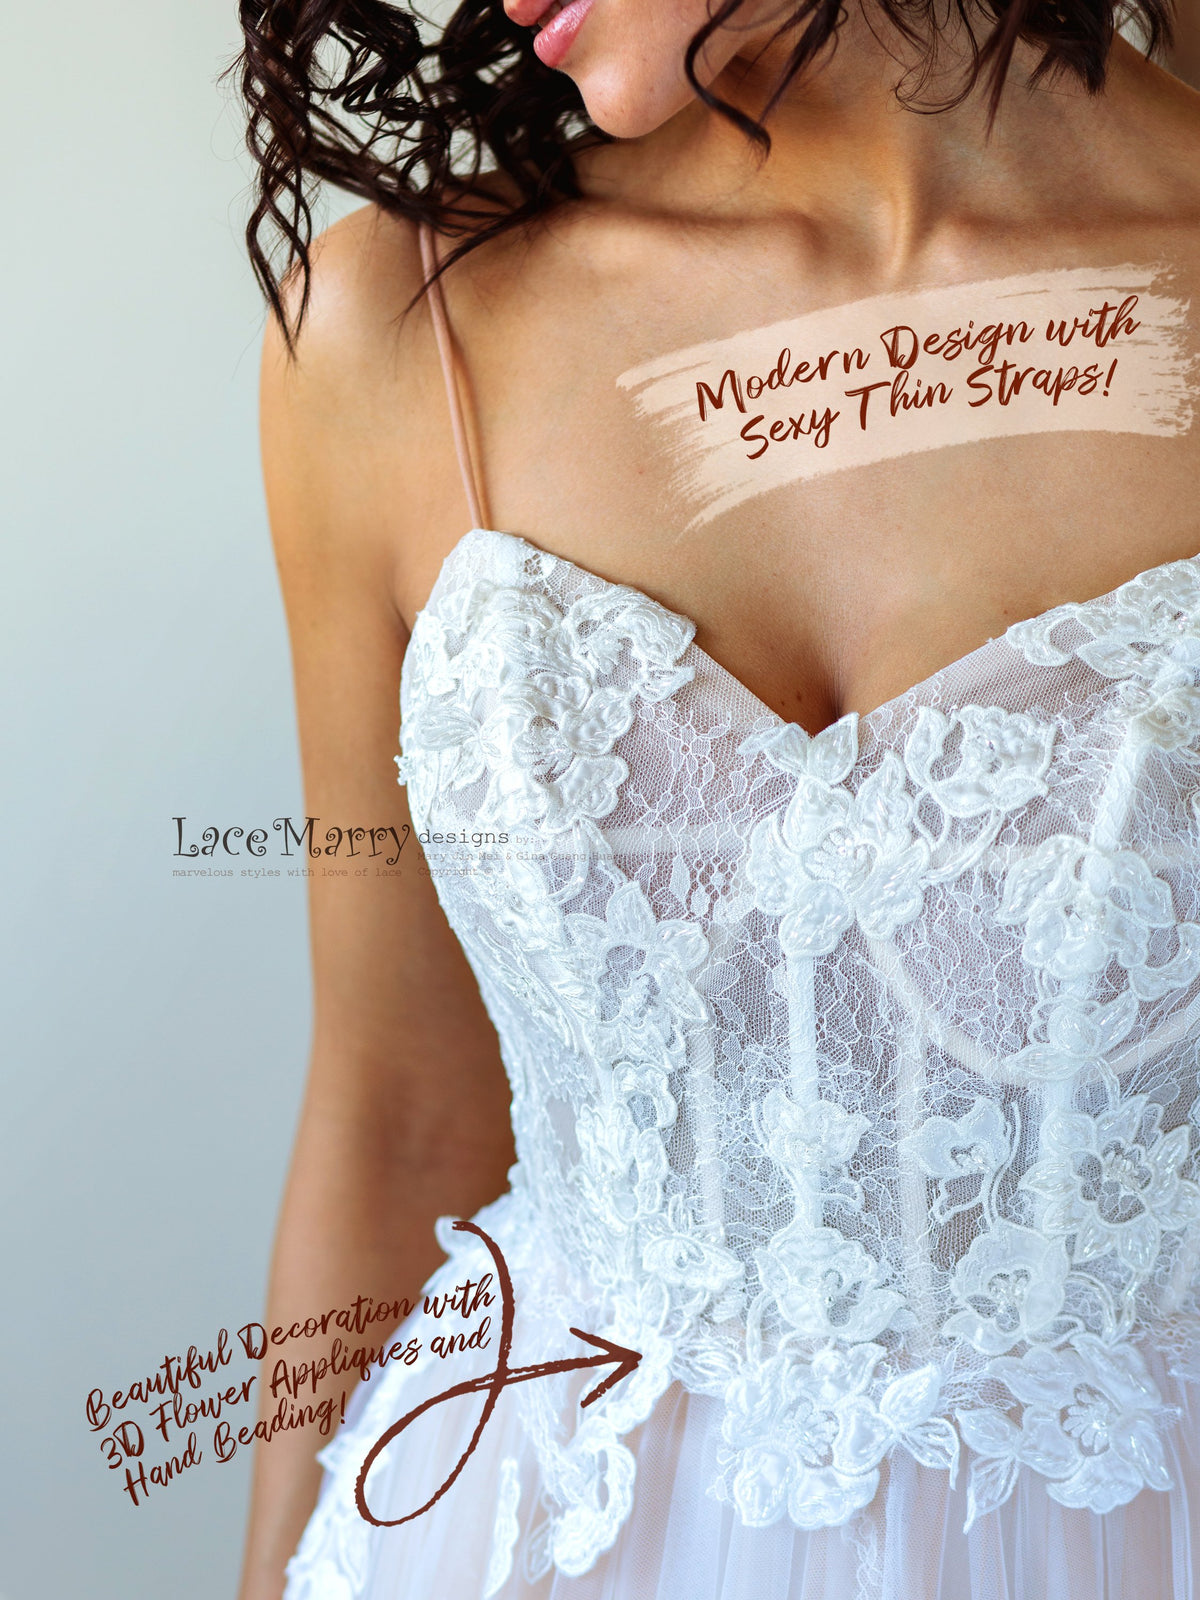 Sweetheart Neckline with Sparkling Flower Appliques